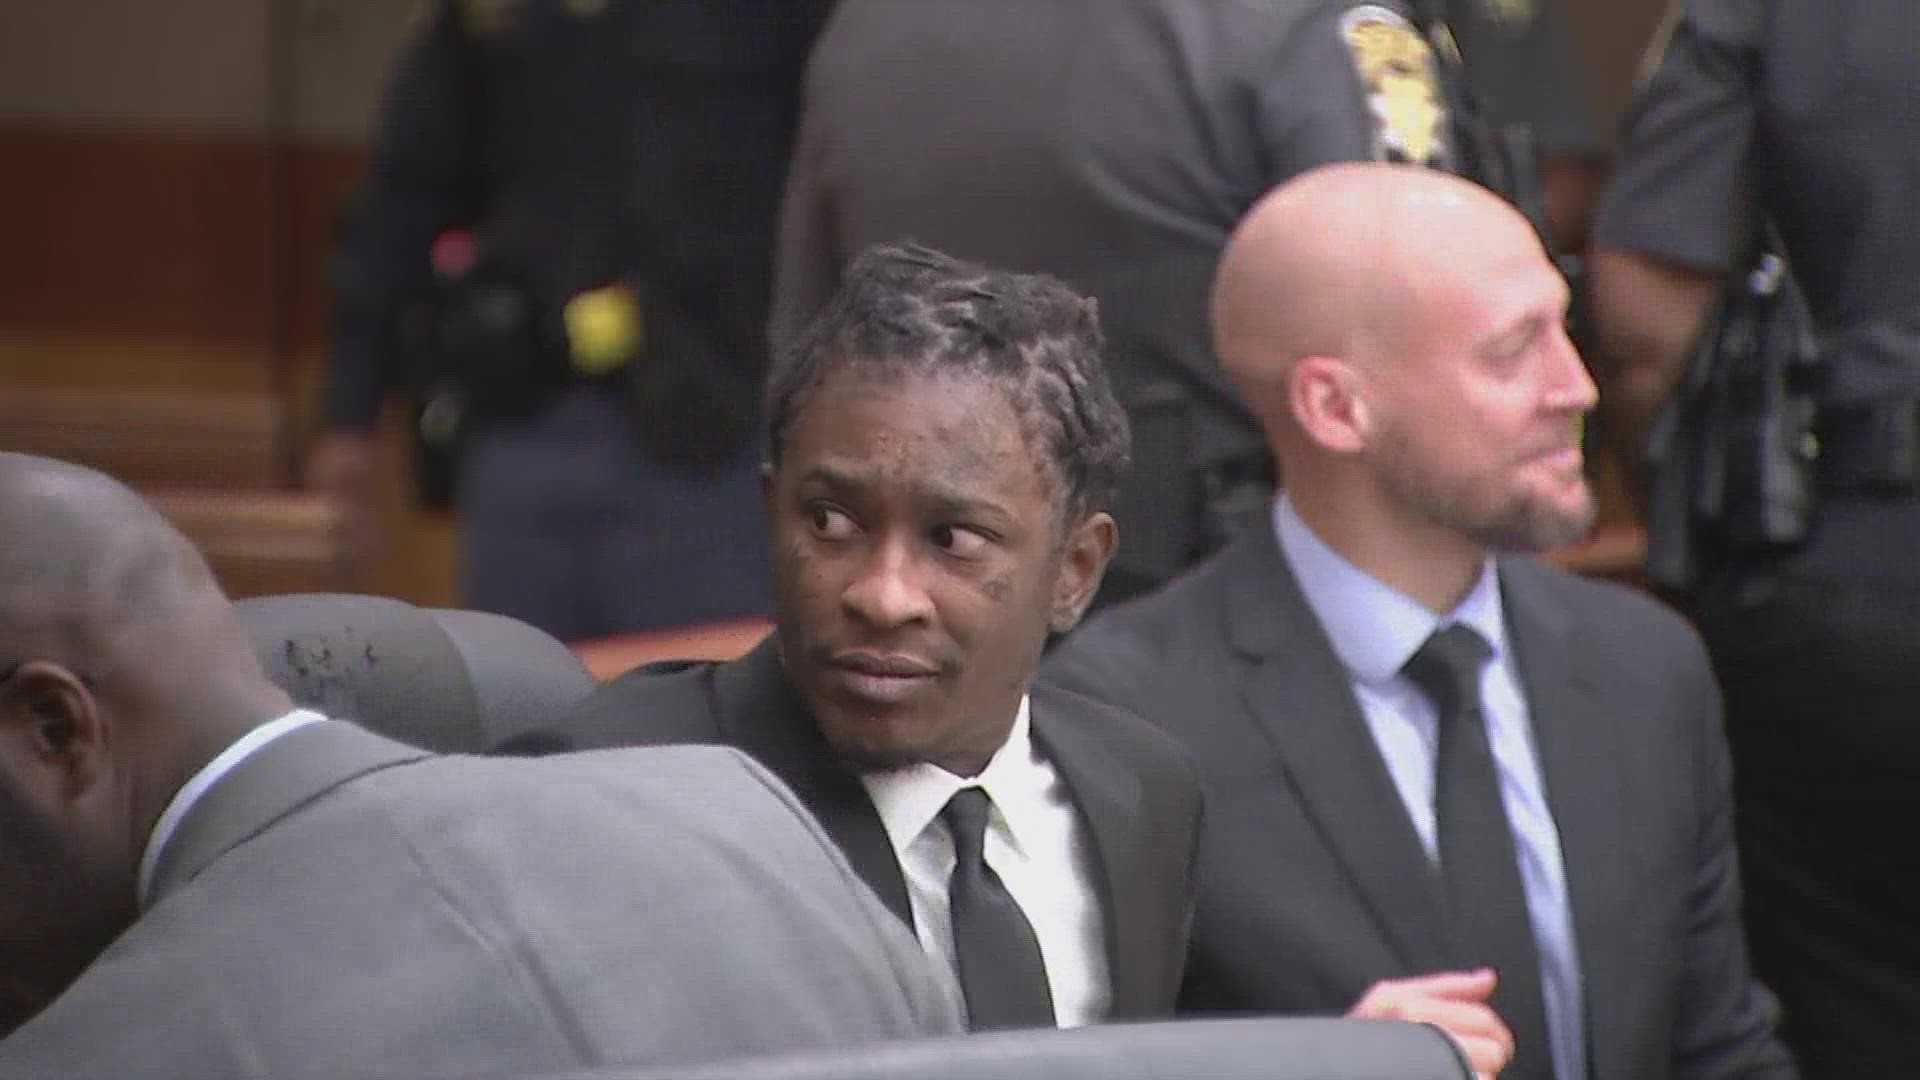 The hearing comes in preparation ahead of the Jan. 9 trial start for Young Thug.